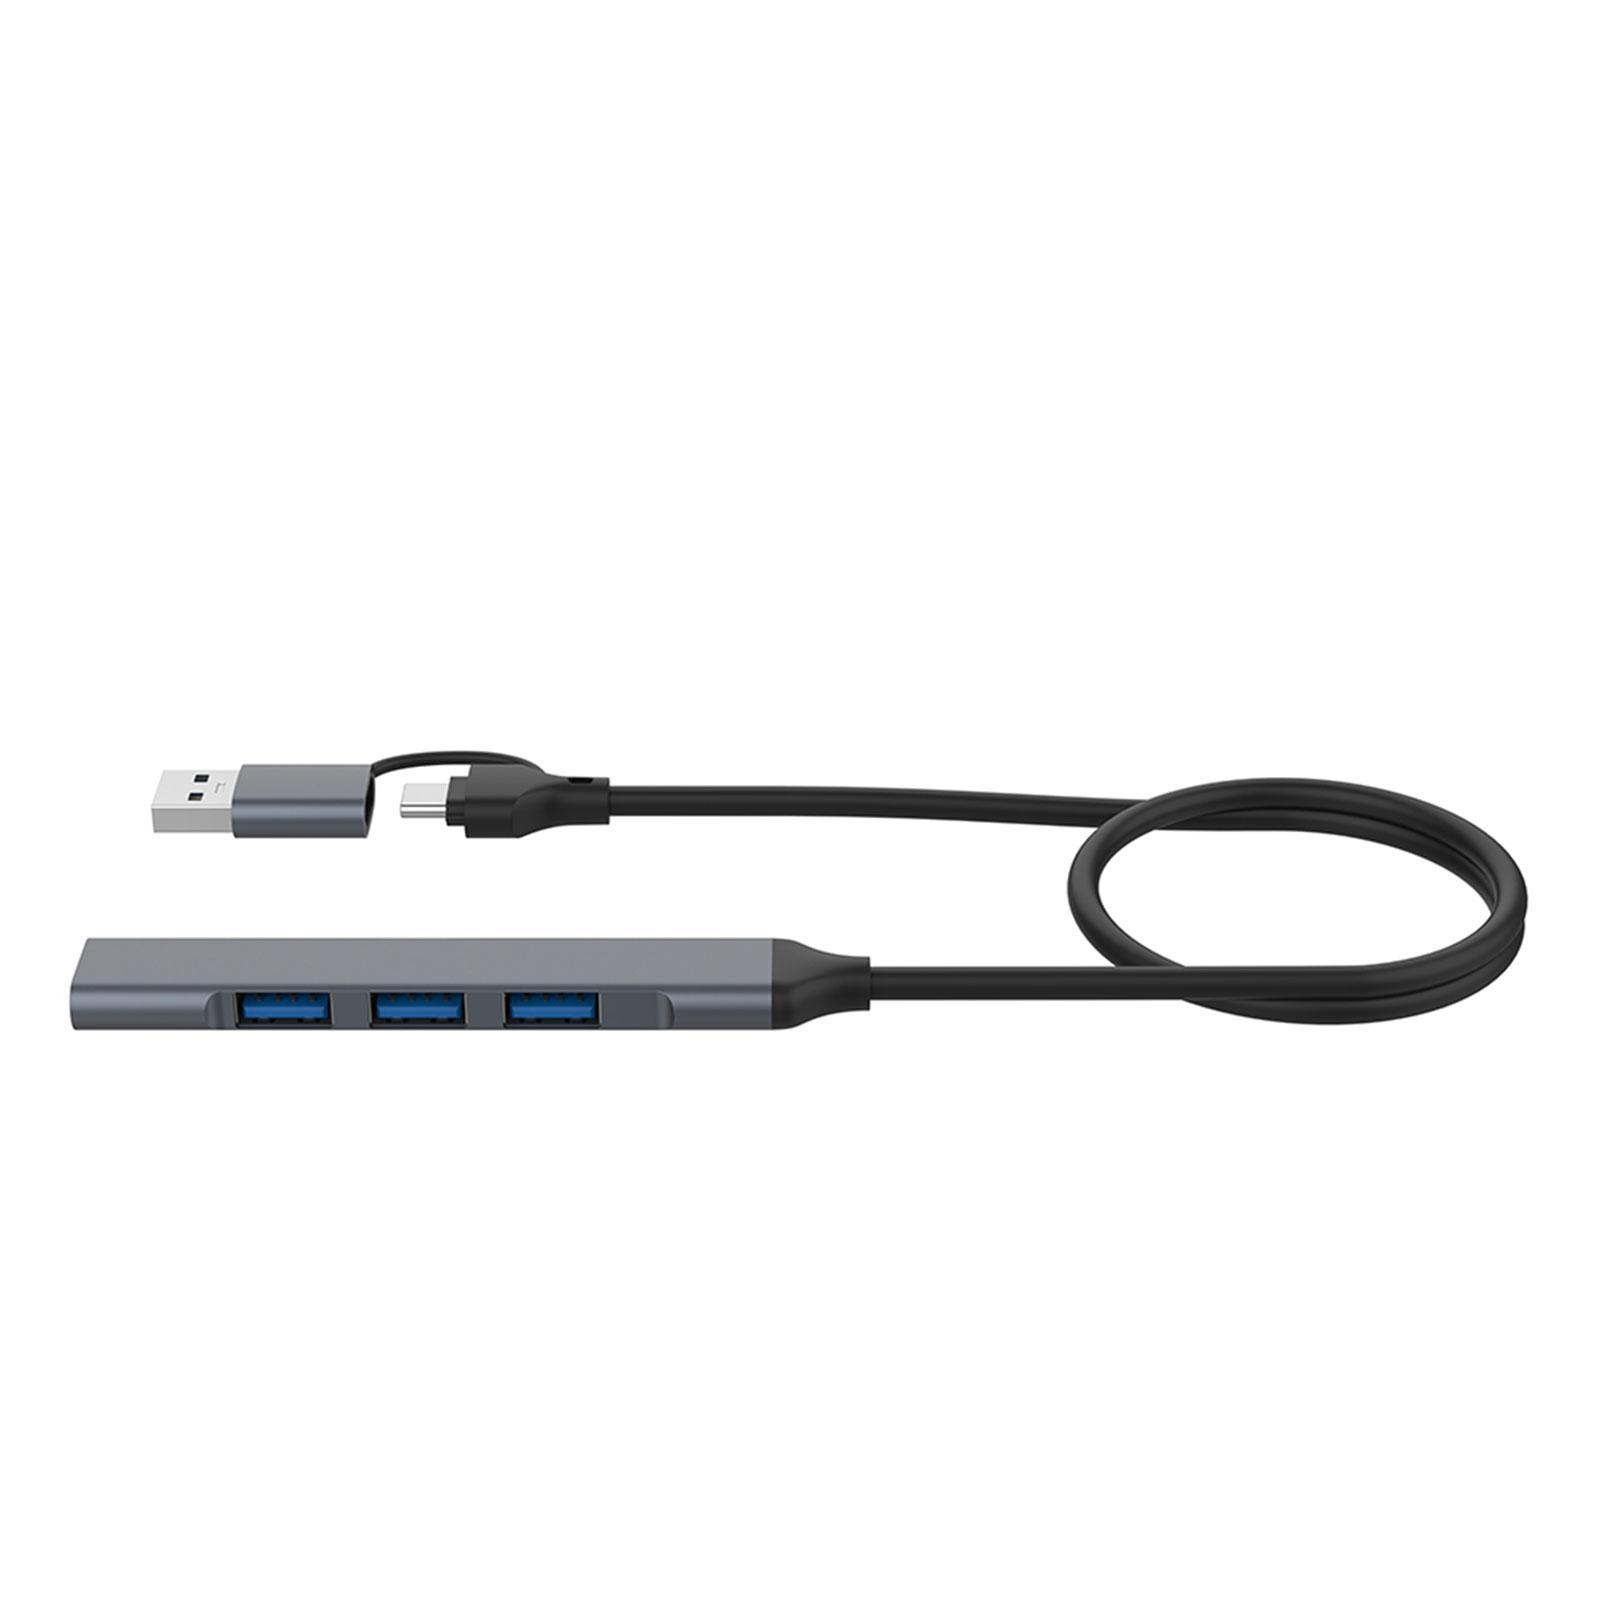 USB A USB C Splitter to USB 3.0 and USB 2.0 Adapter , USB 3.0 Super Speed Data Transfer up to 5Gbps